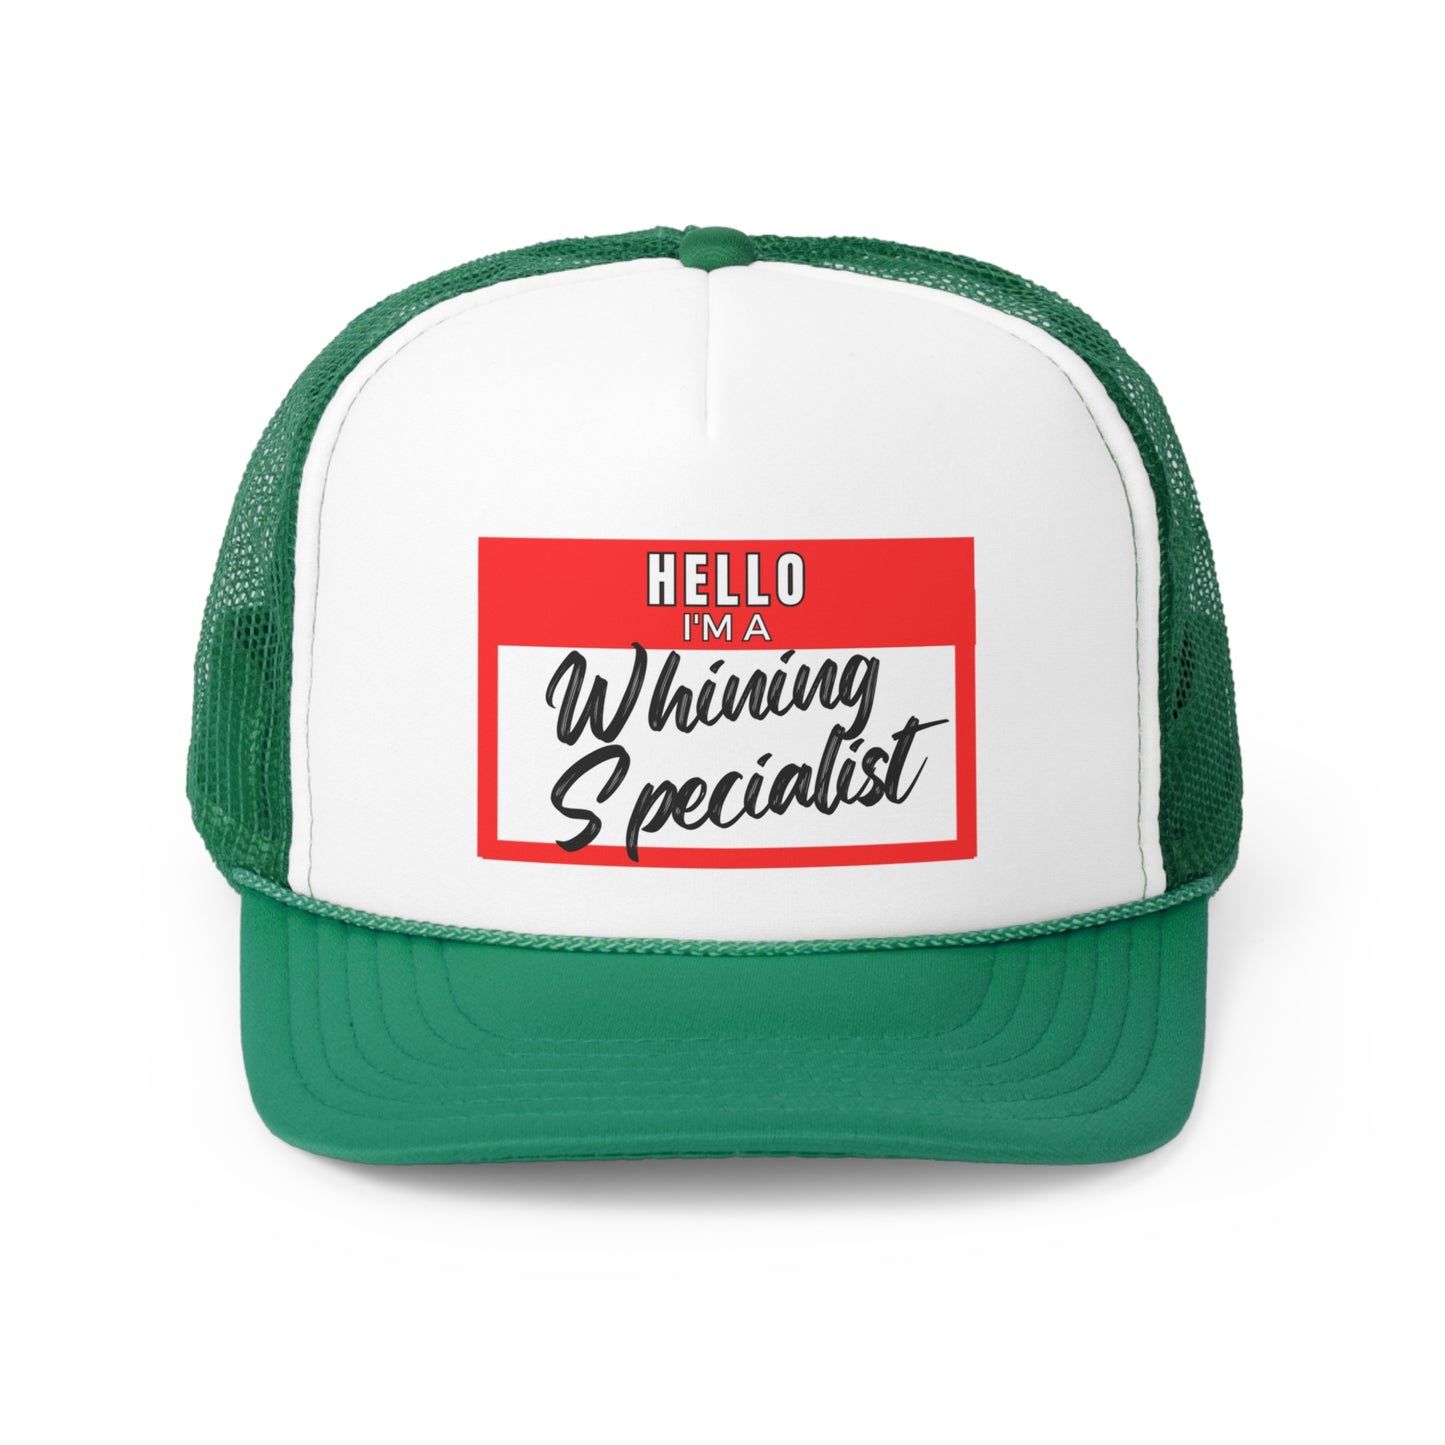 Whining Specialist Trucker Caps